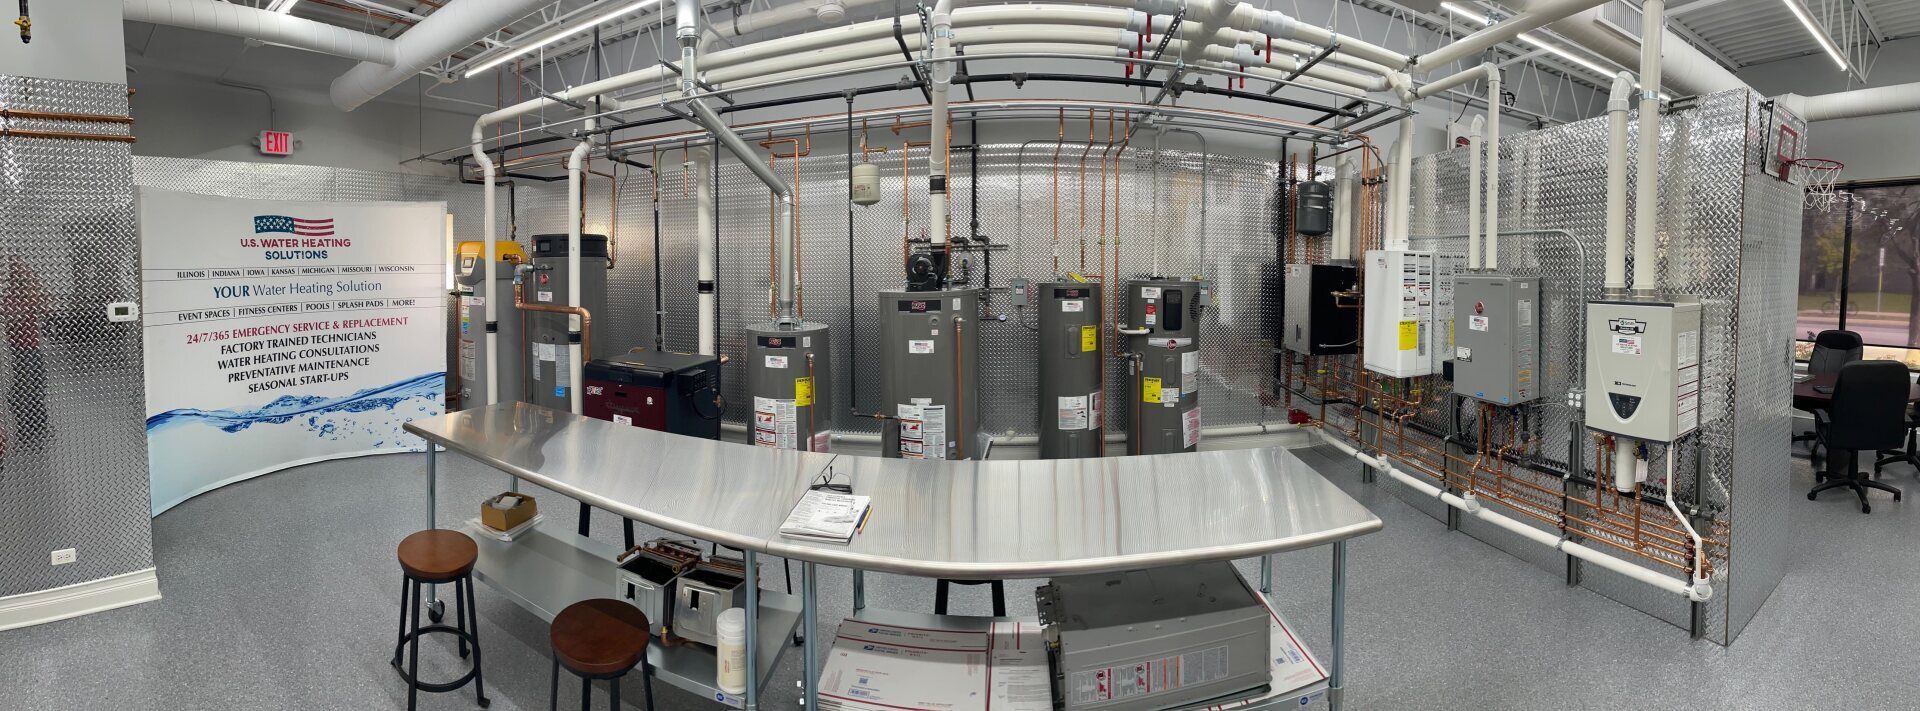 Panorama of Tech Training Center with commercial and residential water heaters